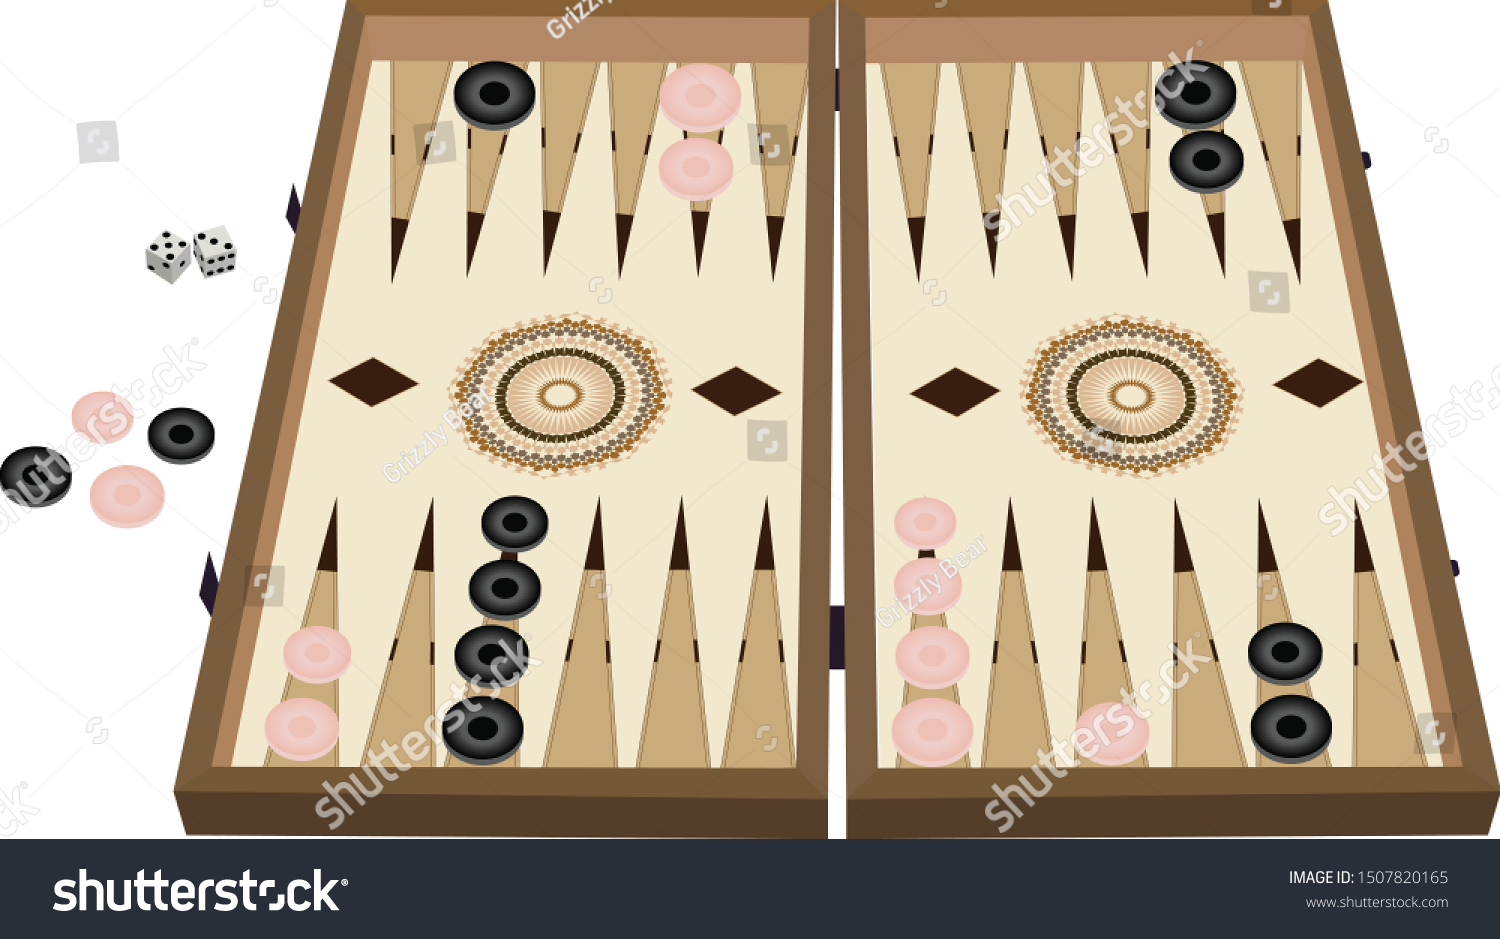 SVG of Traditional Backgammon with dice, Turkish, Lebanese, Arabic Game Board - Illustration Isolated Icon svg